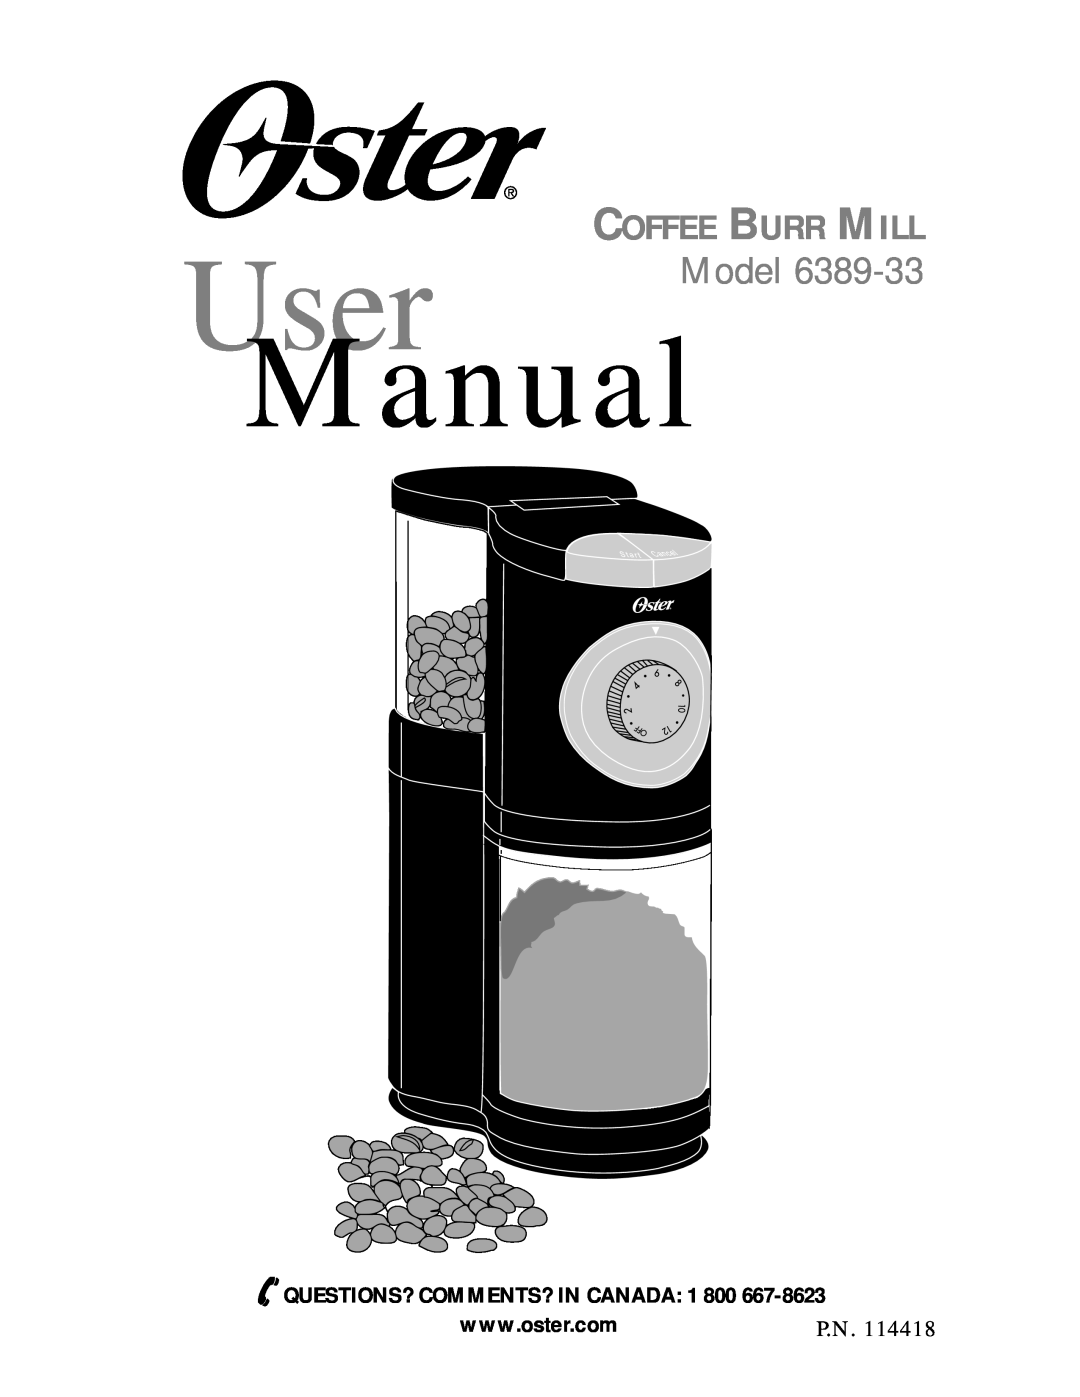 Oster 6389-33 user manual User, Manual, Coffee Burr Mill, Model, QUESTIONS? COMMENTS? IN CANADA 1 800 